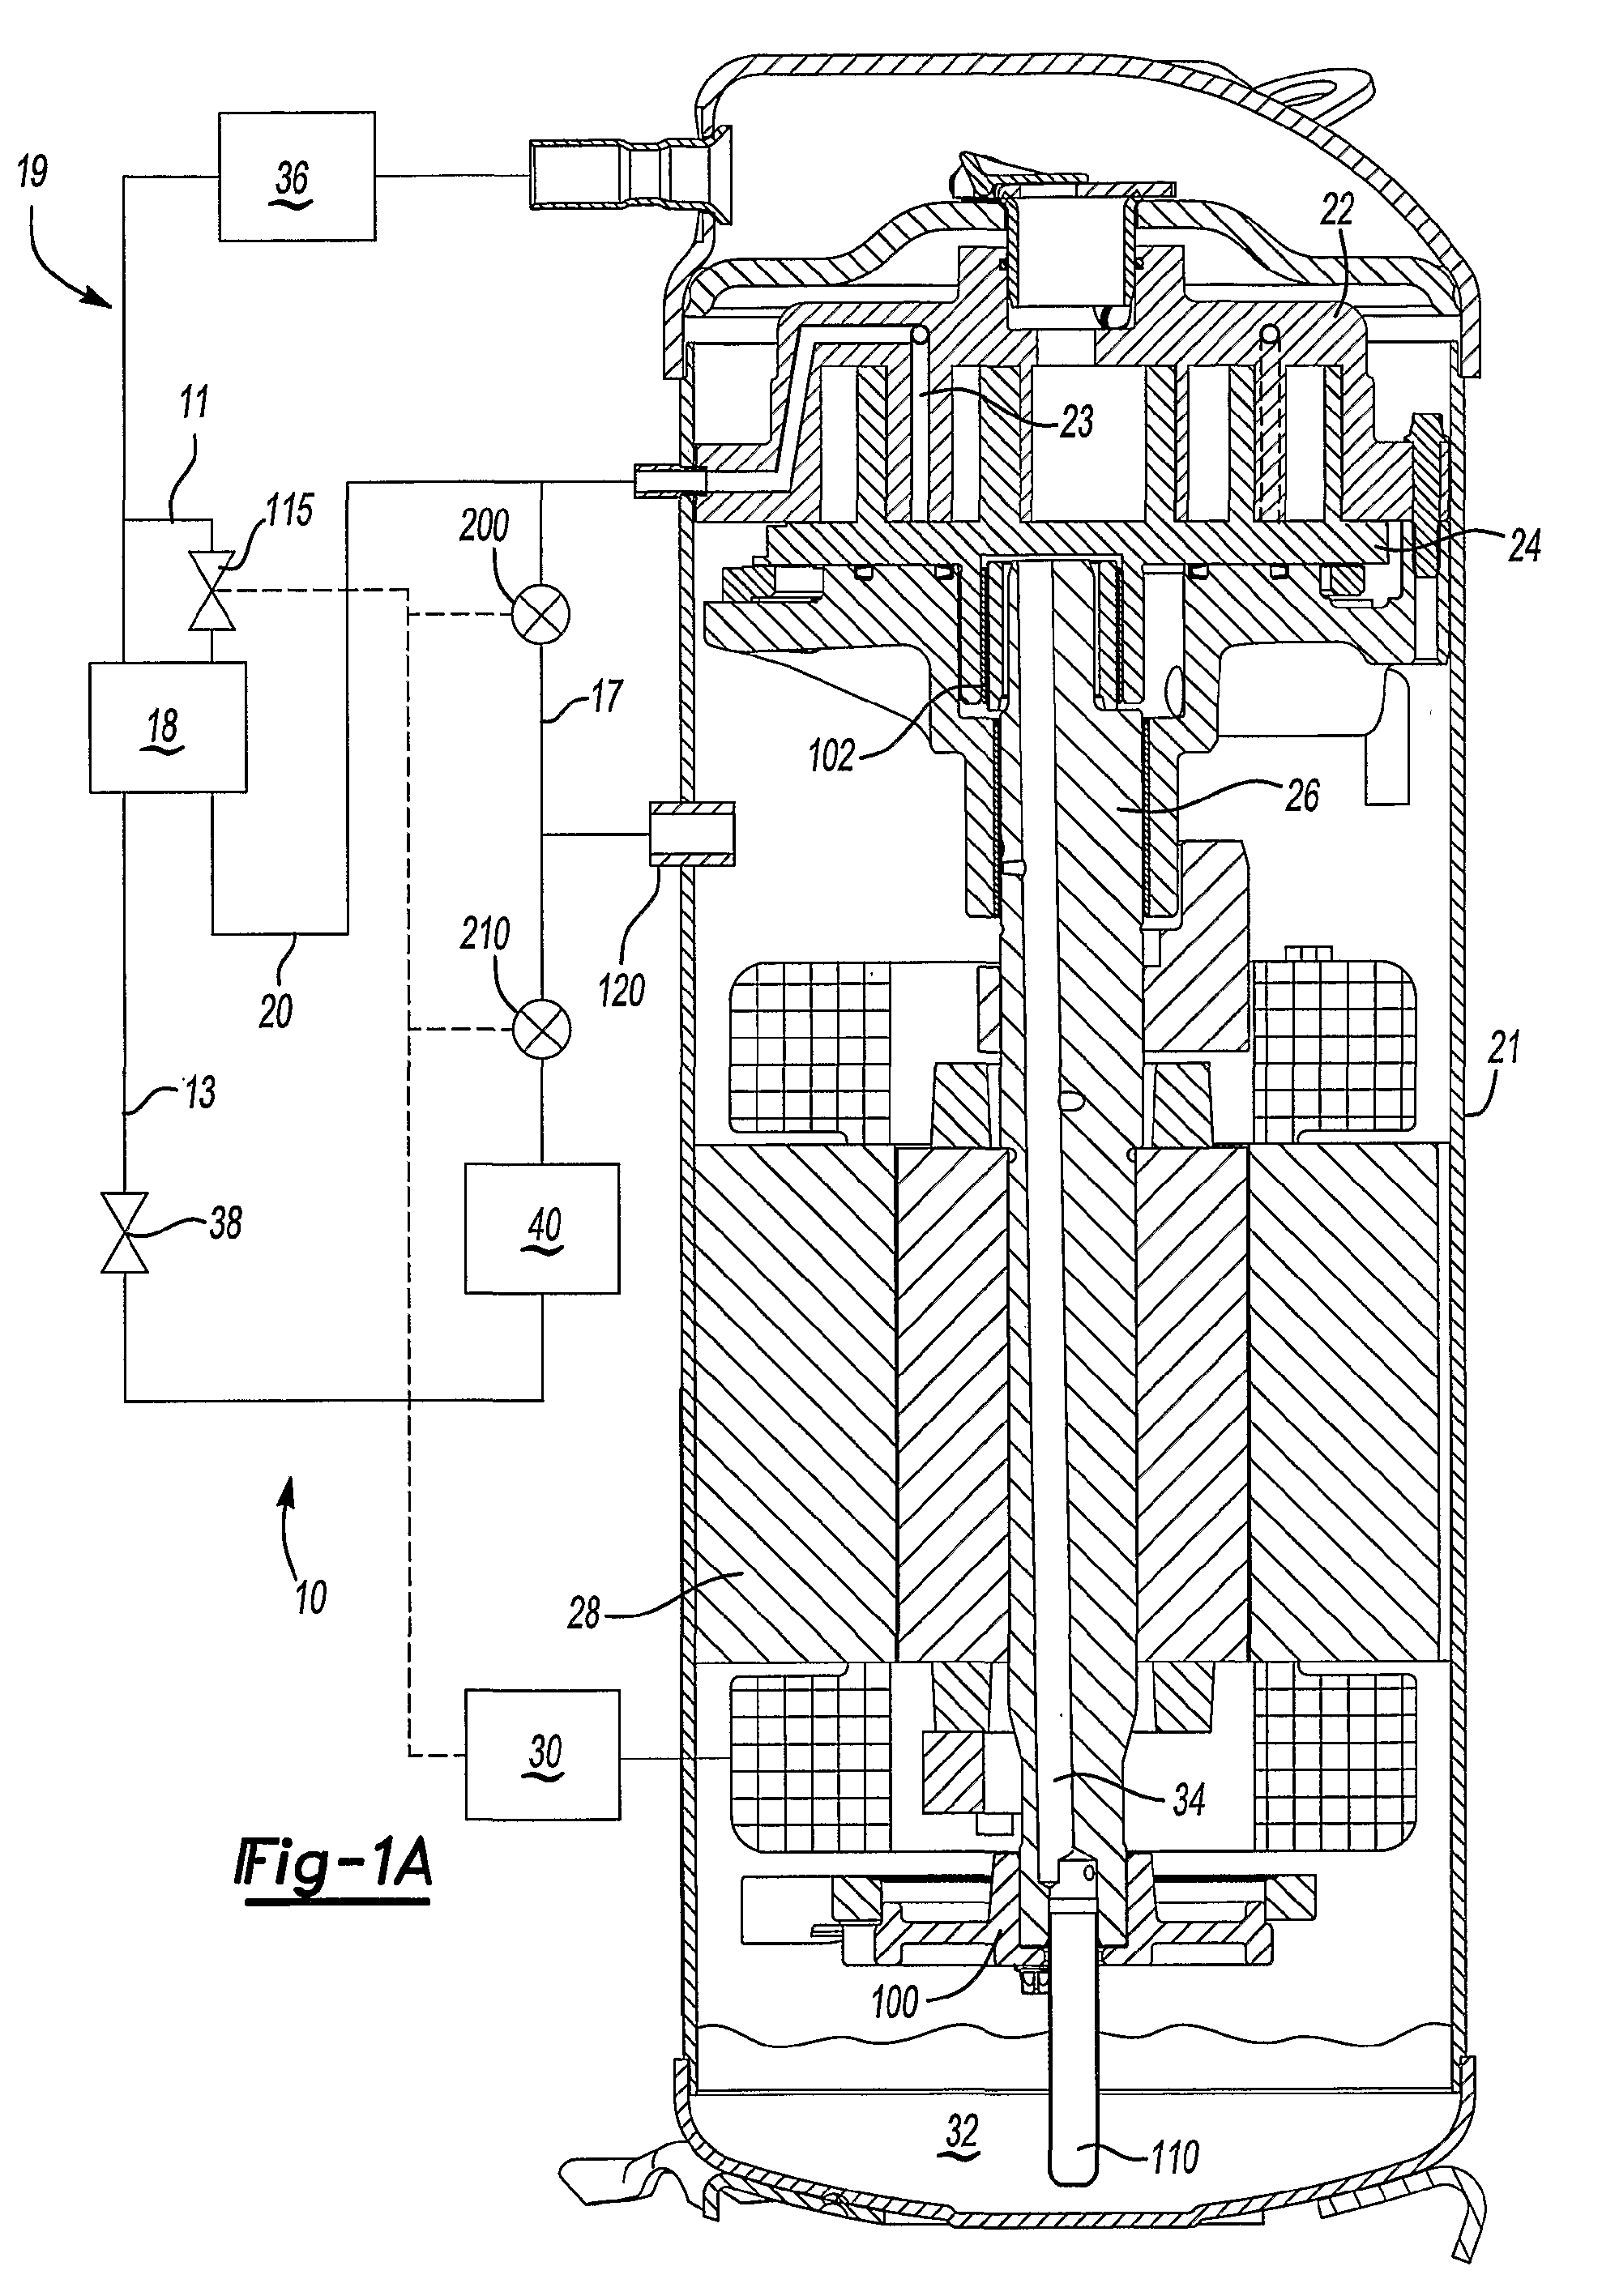 Refrigerant System with Pulse Width Modulated Components and Variable Speed Compressor